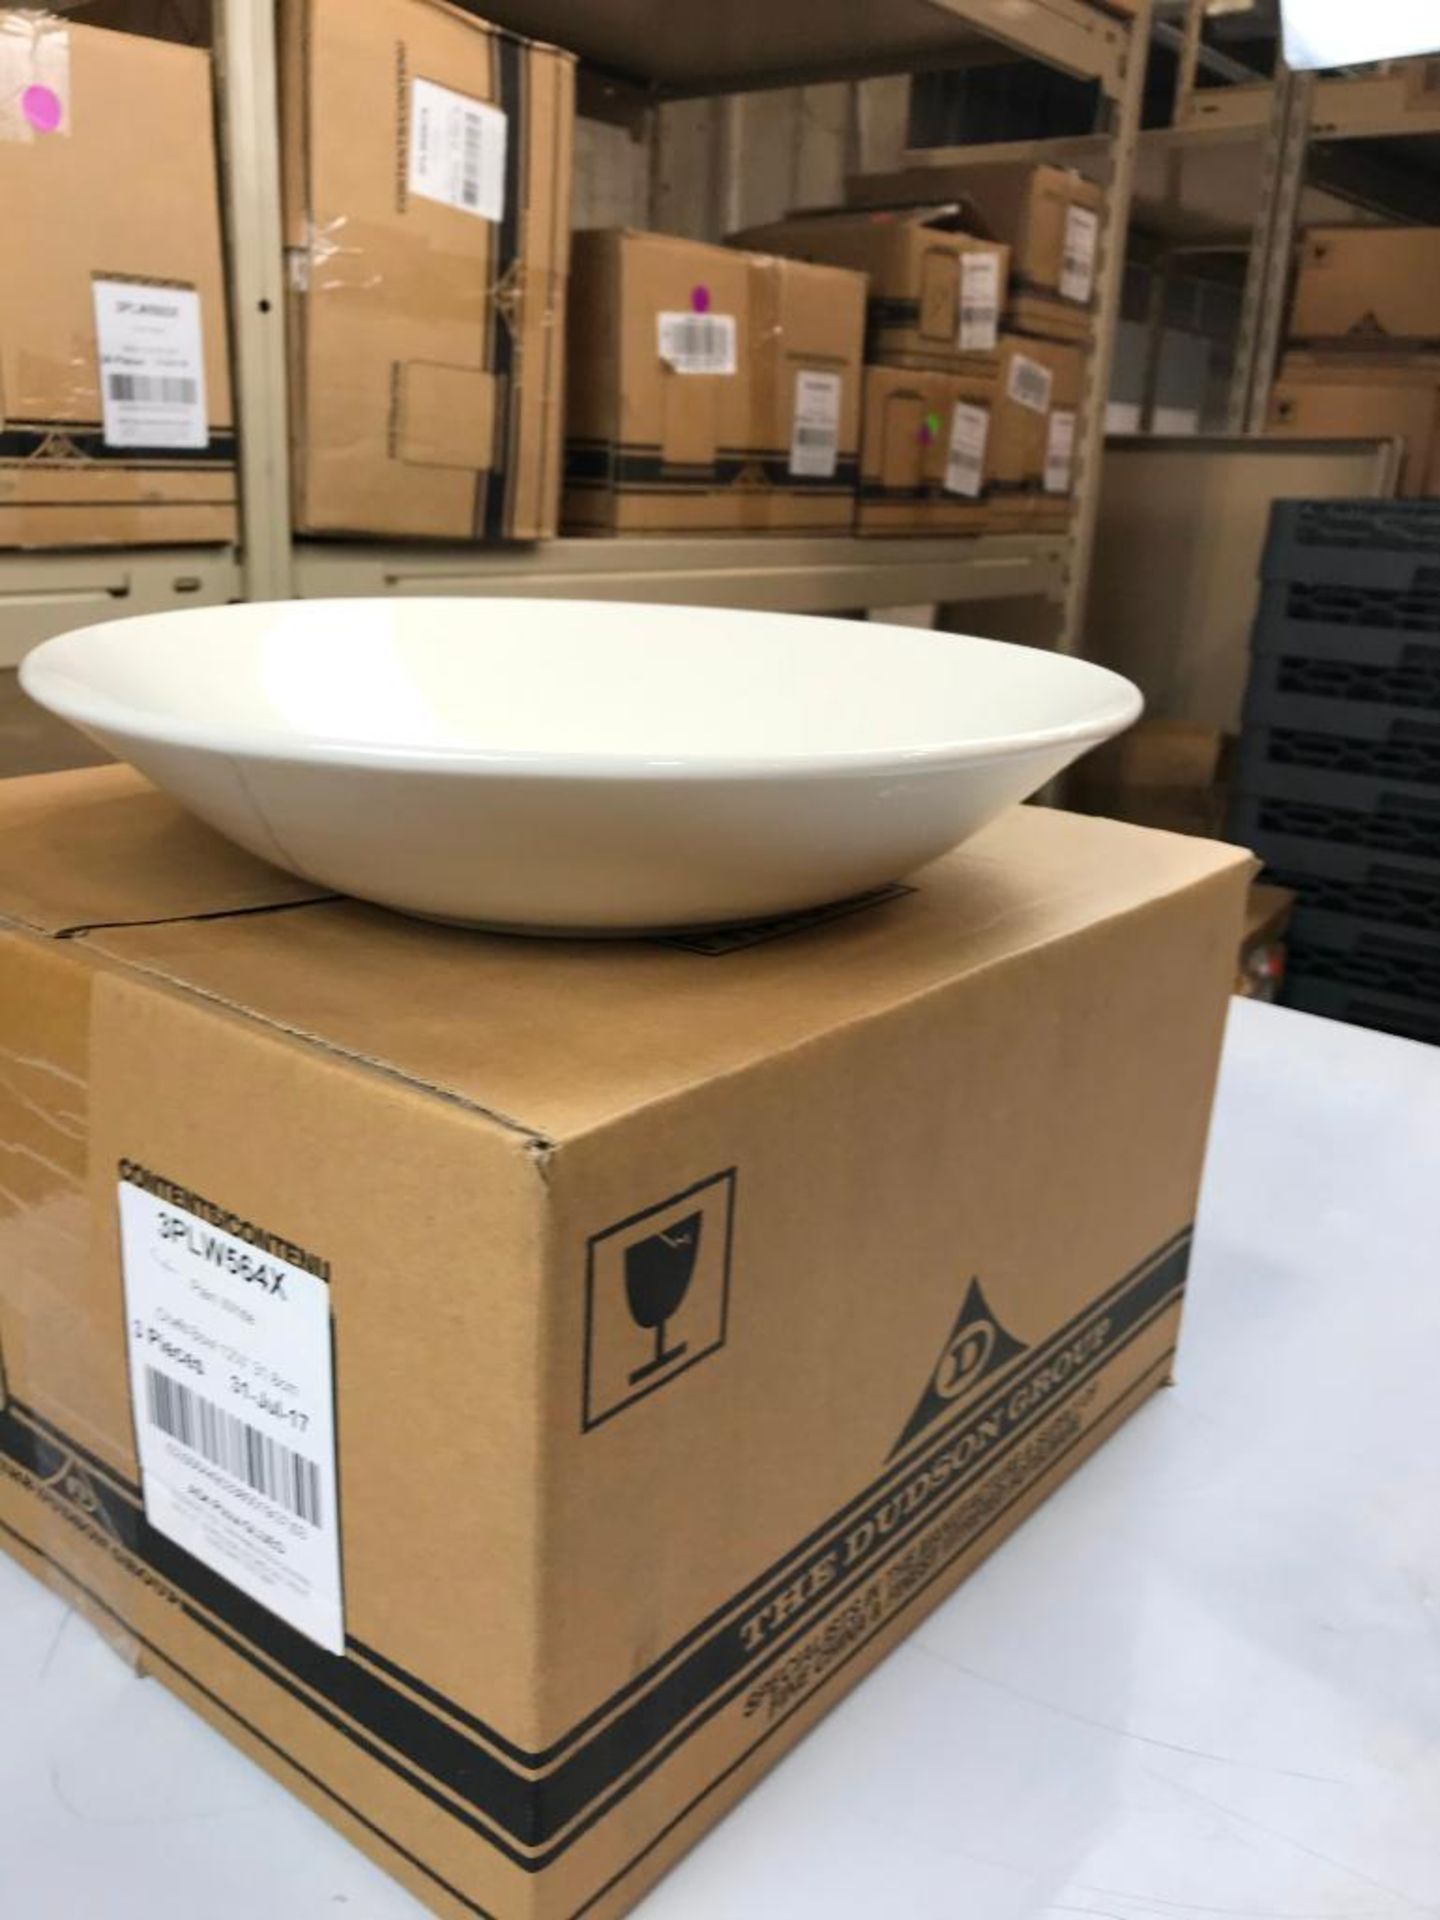 DUDSON CLASSIC CHEF'S BOWL 12.5" - 3/CASE, MADE IN ENGLAND - Image 2 of 5